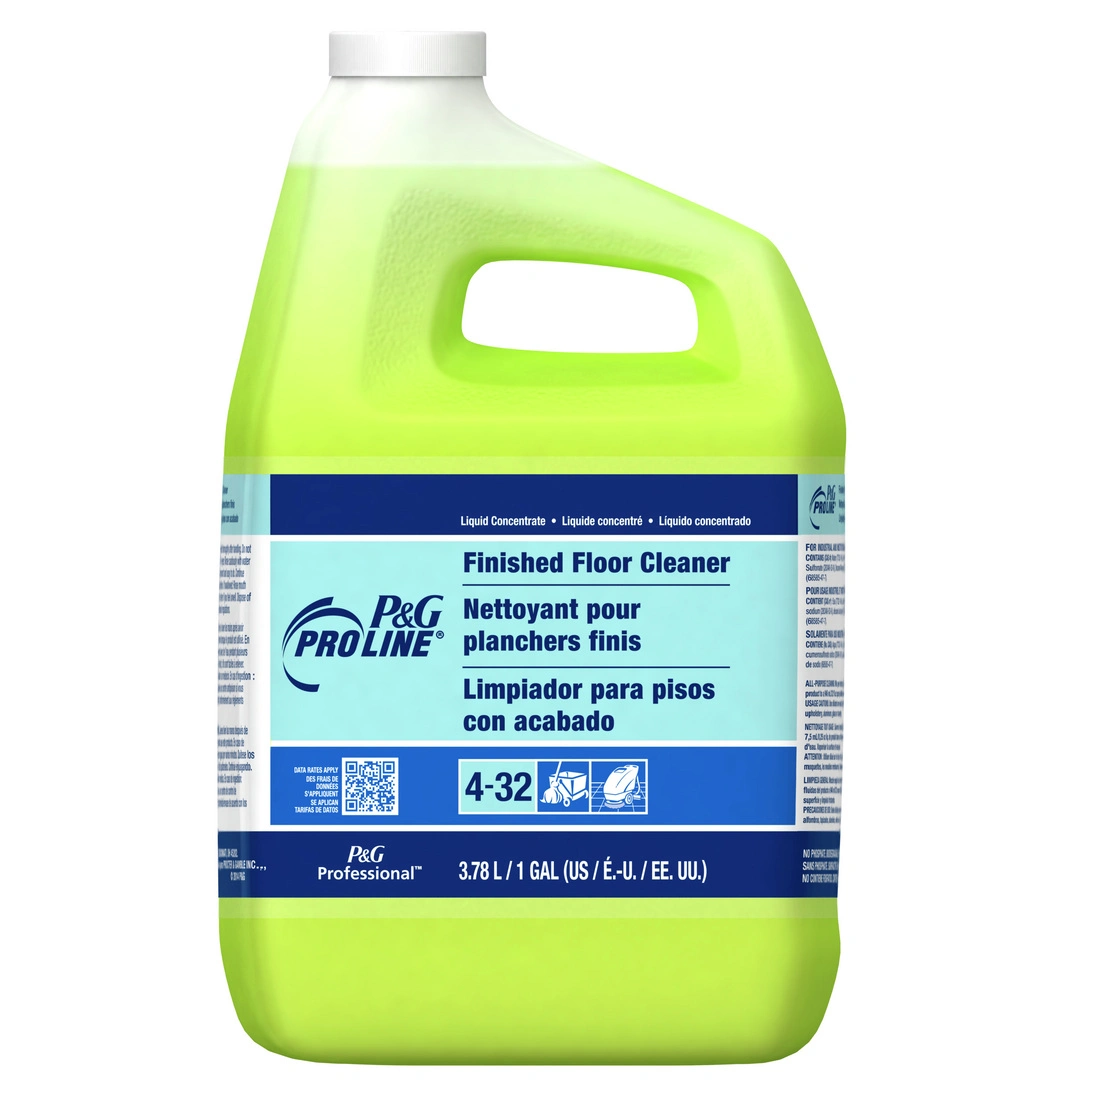 Finished Floor Cleaner Product Hero Image